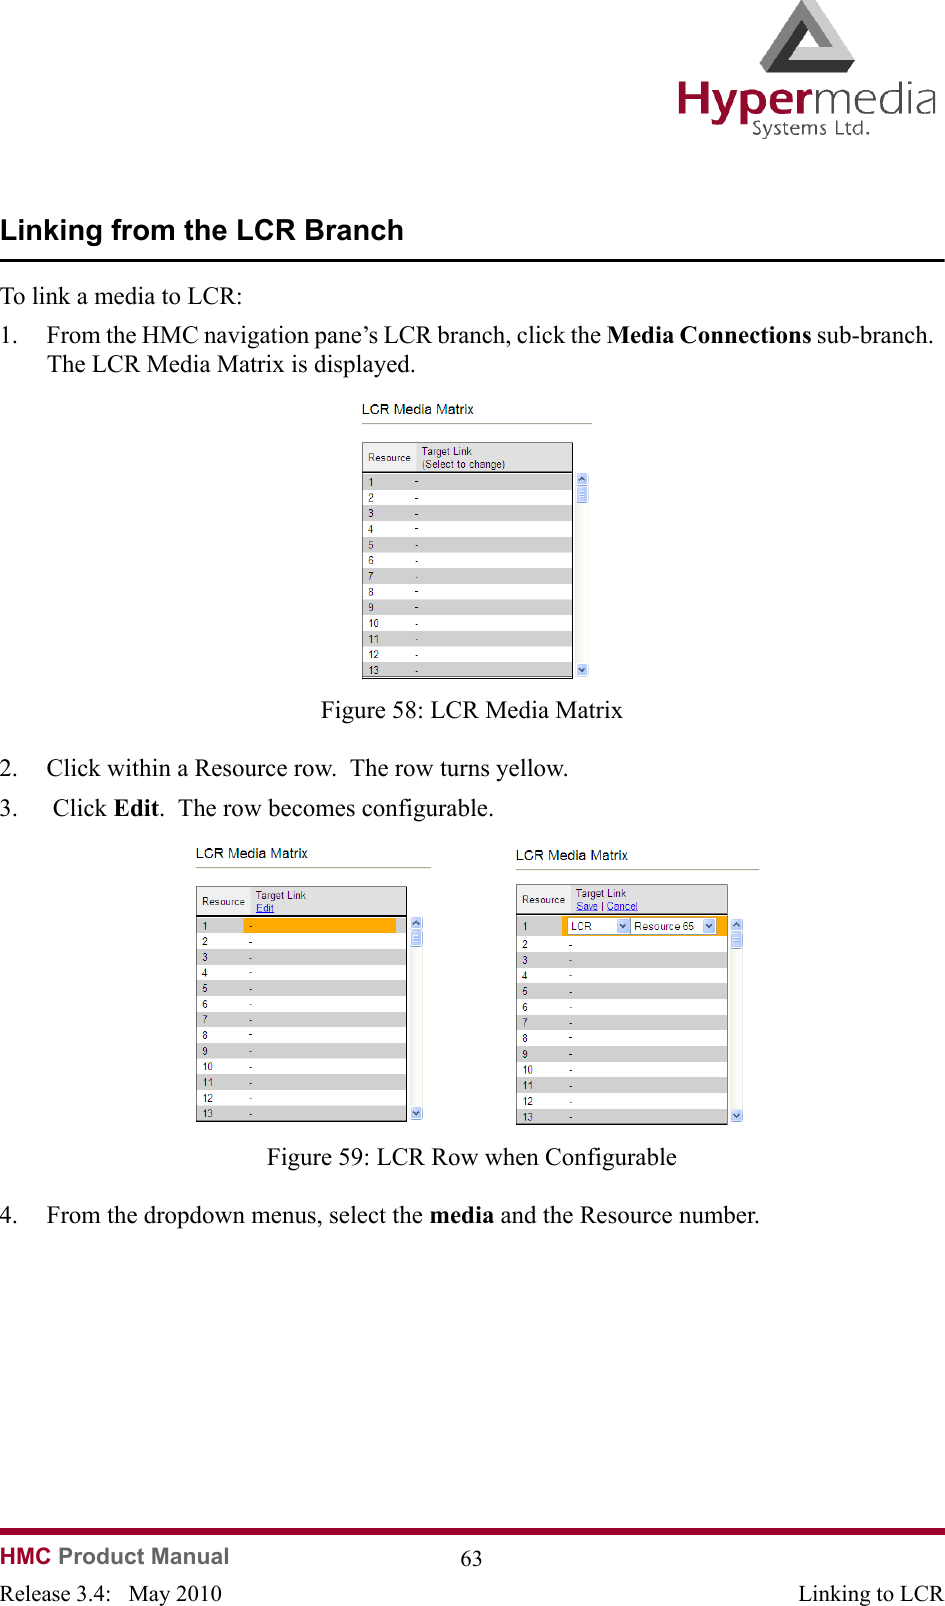 HMC Product Manual  63Release 3.4:   May 2010 Linking to LCRLinking from the LCR BranchTo link a media to LCR:1. From the HMC navigation pane’s LCR branch, click the Media Connections sub-branch.  The LCR Media Matrix is displayed.              Figure 58: LCR Media Matrix2. Click within a Resource row.  The row turns yellow.3.  Click Edit.  The row becomes configurable.              Figure 59: LCR Row when Configurable4. From the dropdown menus, select the media and the Resource number.